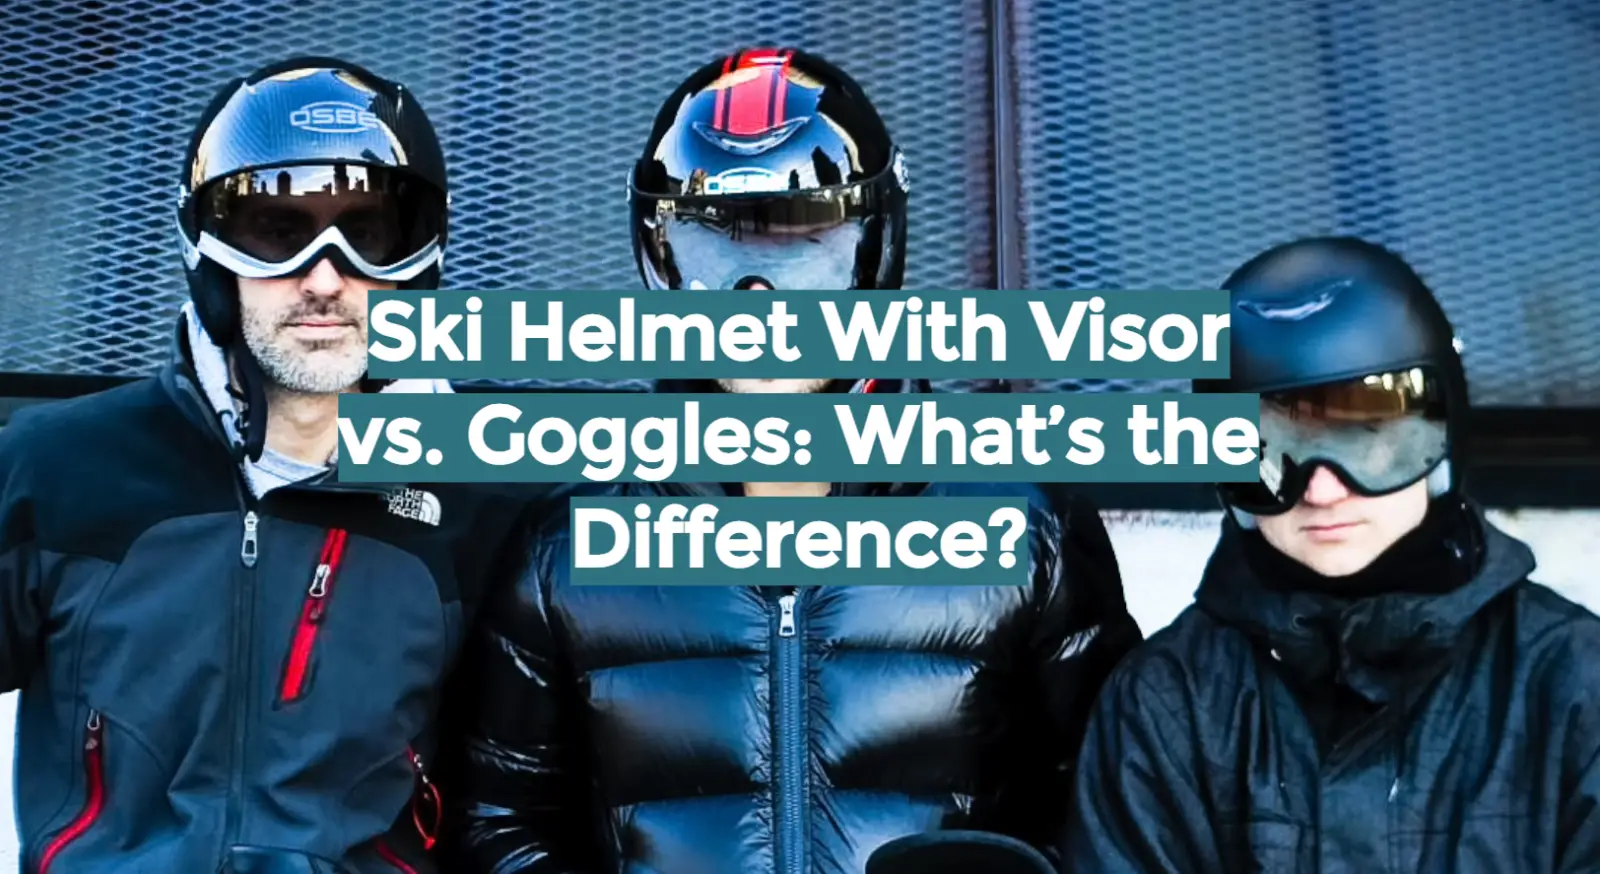 Ski Helmet With Visor vs. Goggles: What’s the Difference?